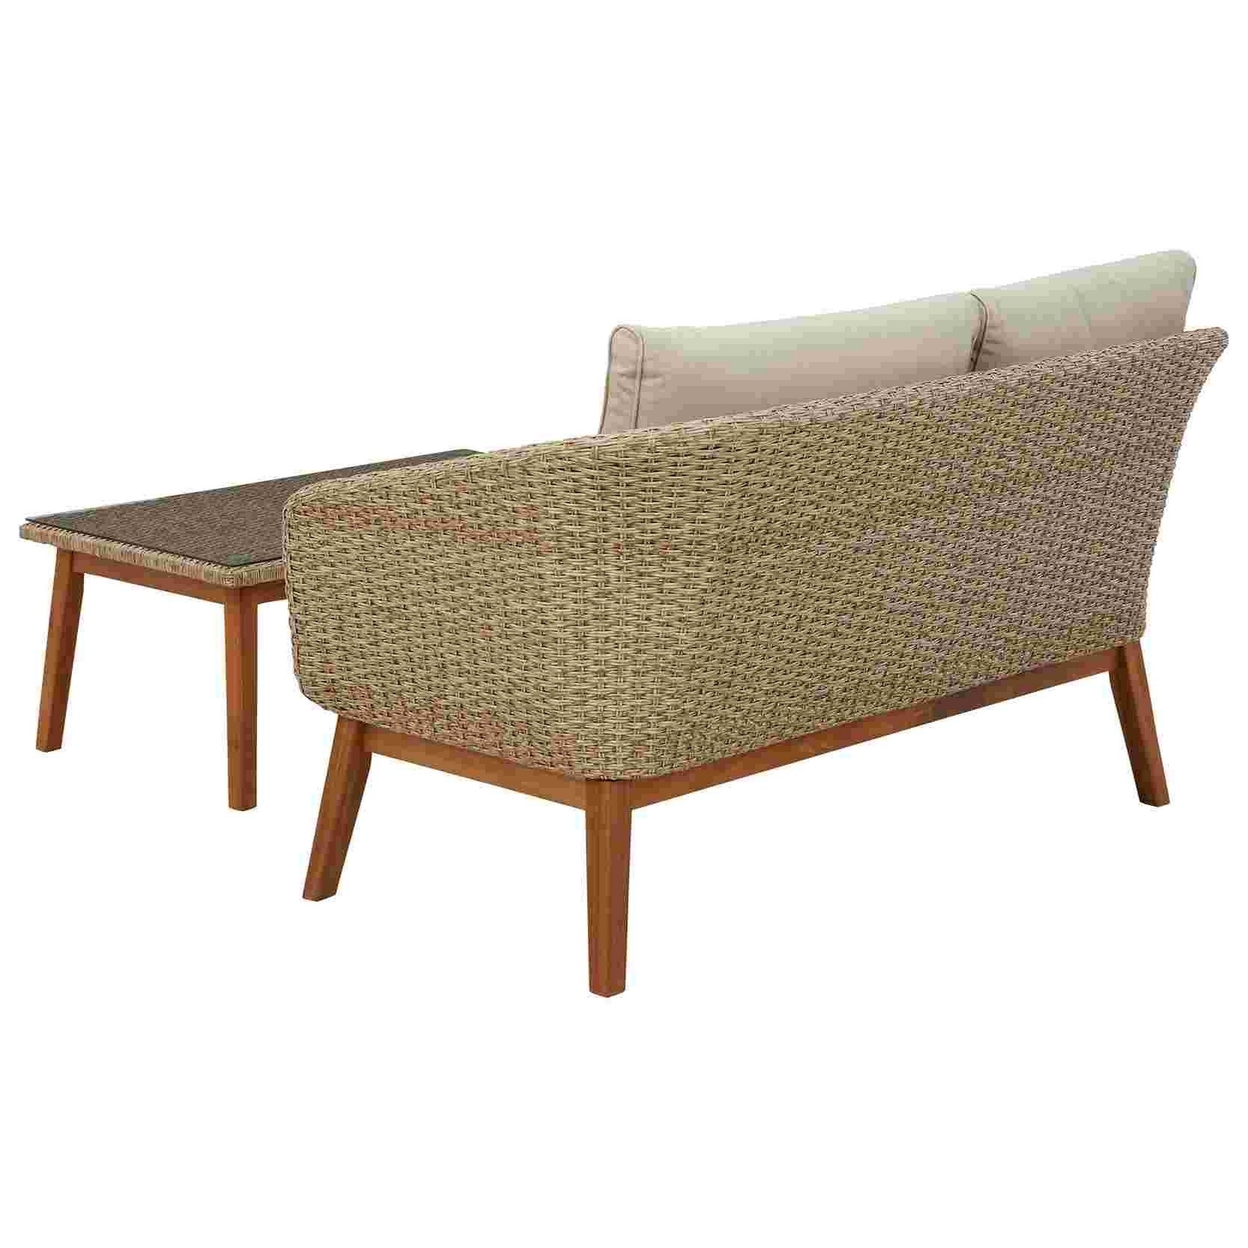 2 Piece Outdoor Loveseat And Table With Resin Wicker Wrapping, Brown- Saltoro Sherpi